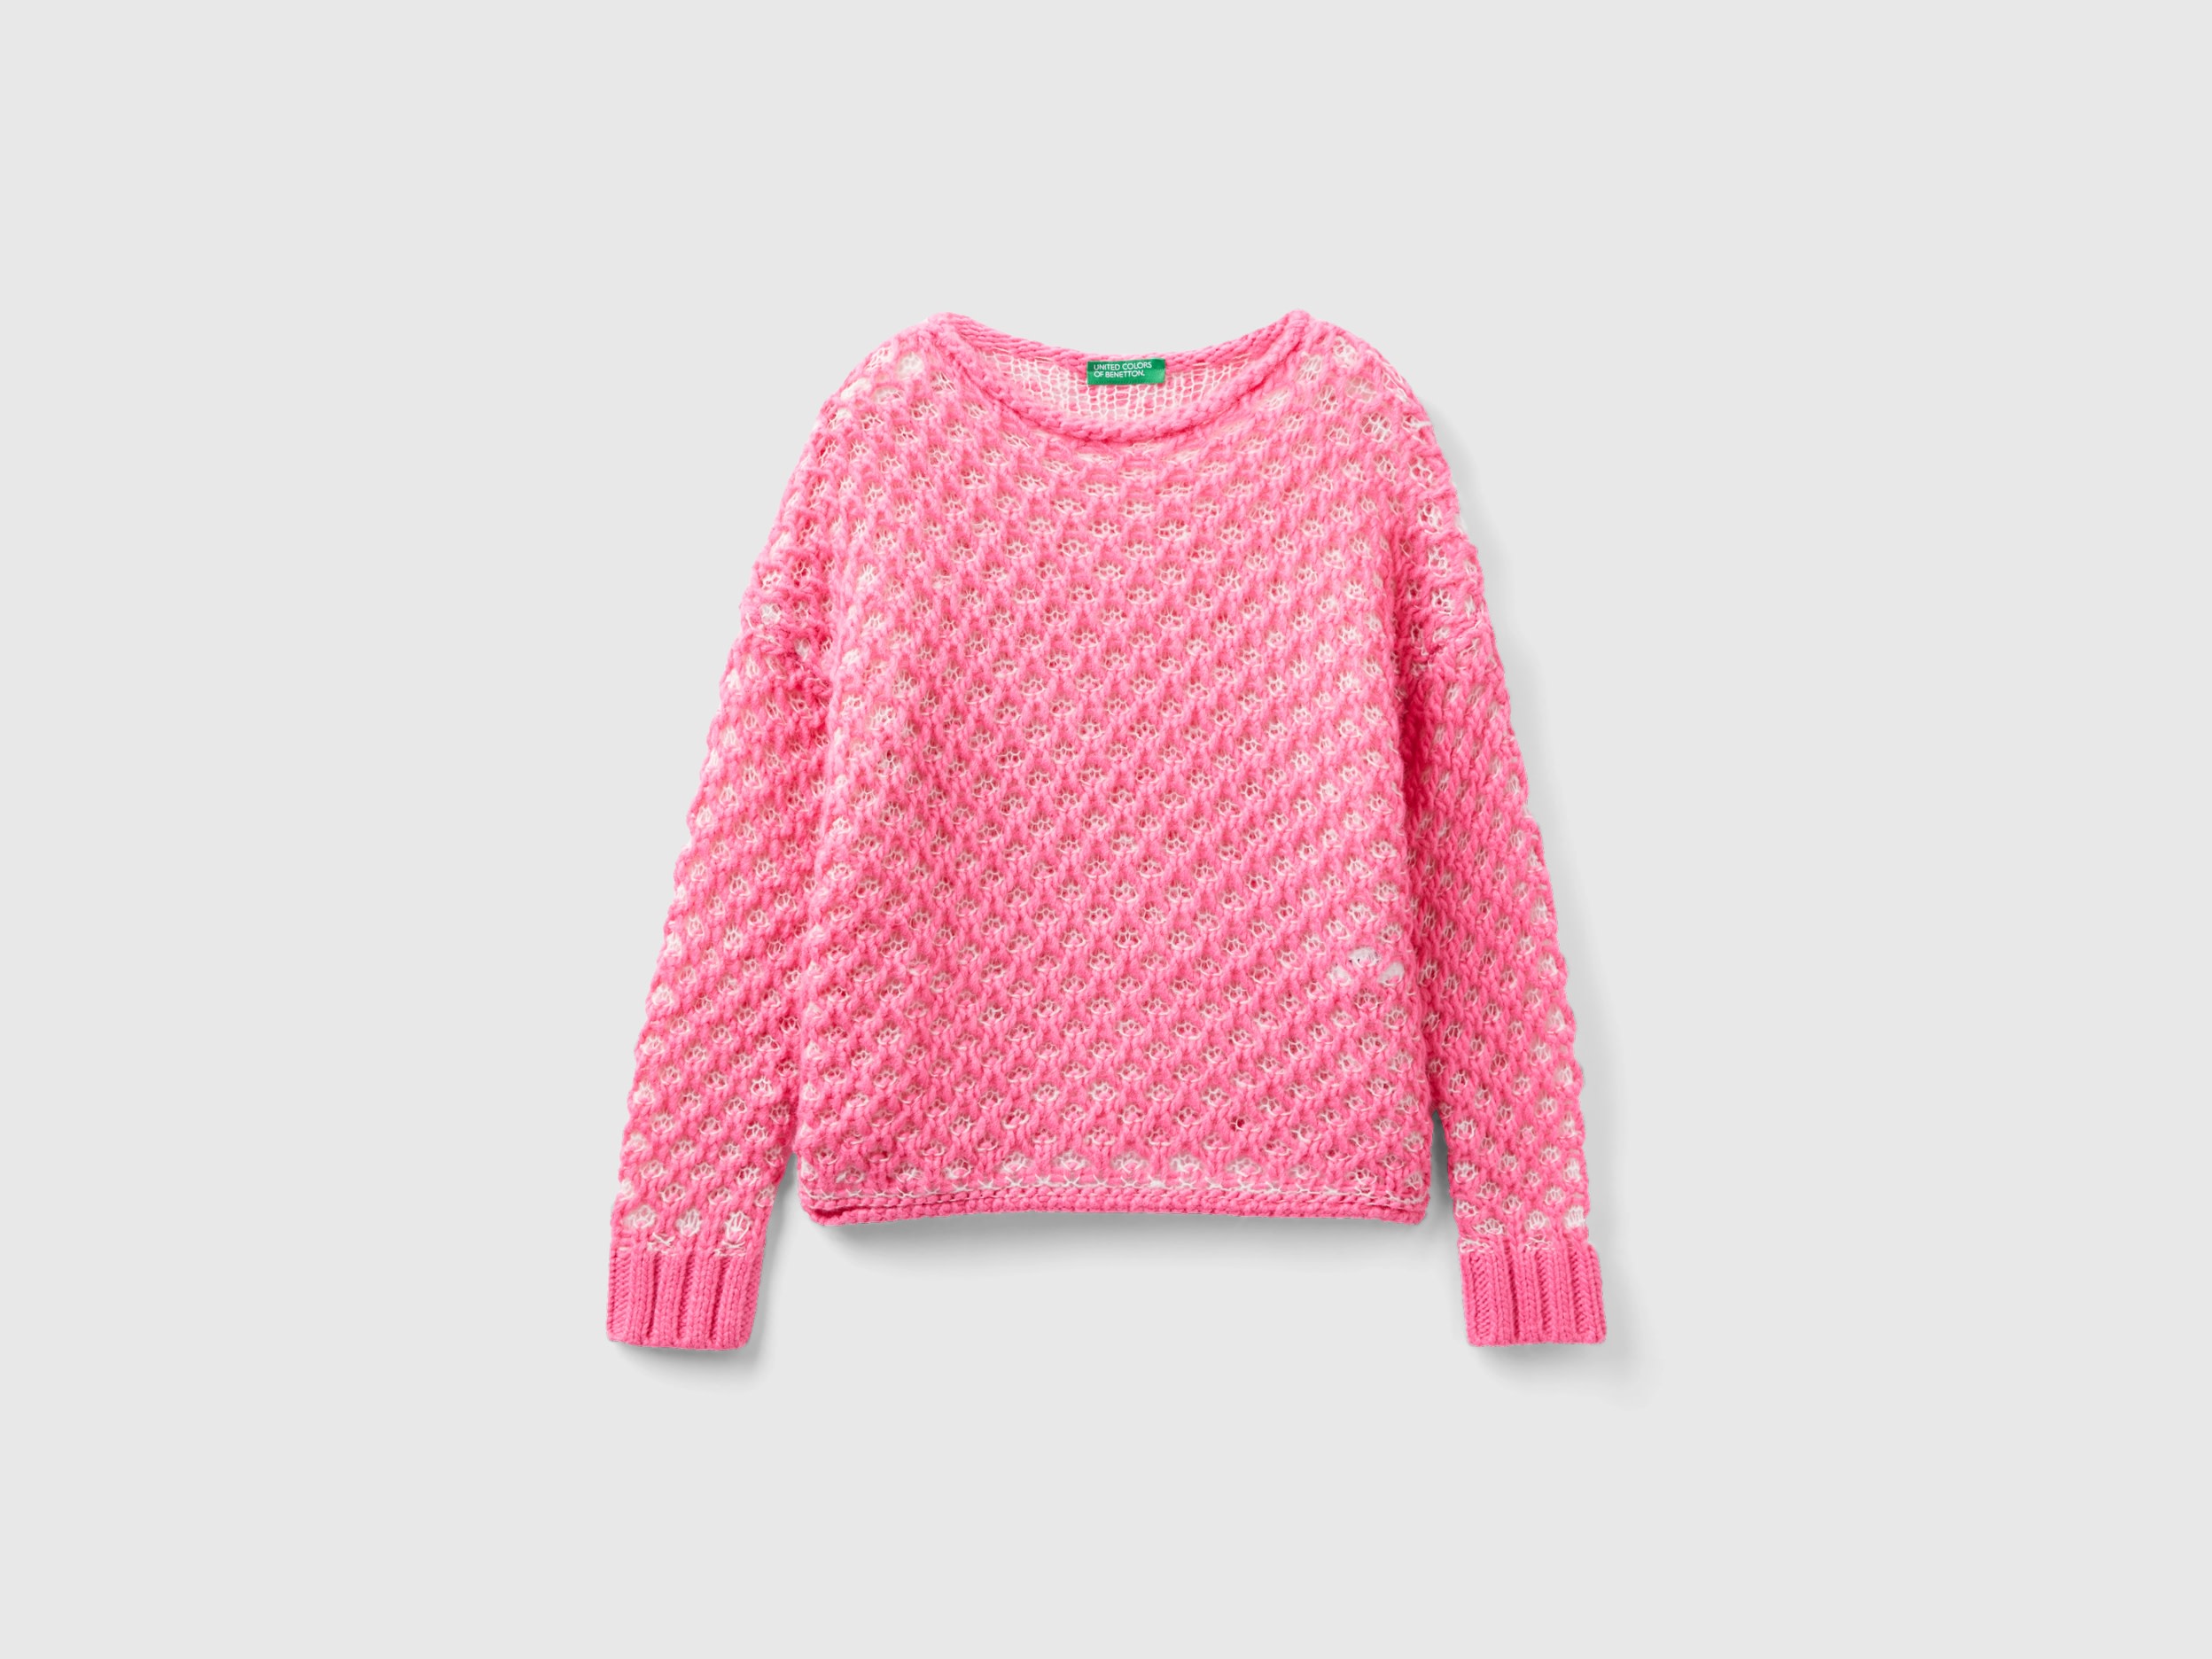 Benetton, Sweater With Jacquard Mesh, size 2XL, Pink, Kids